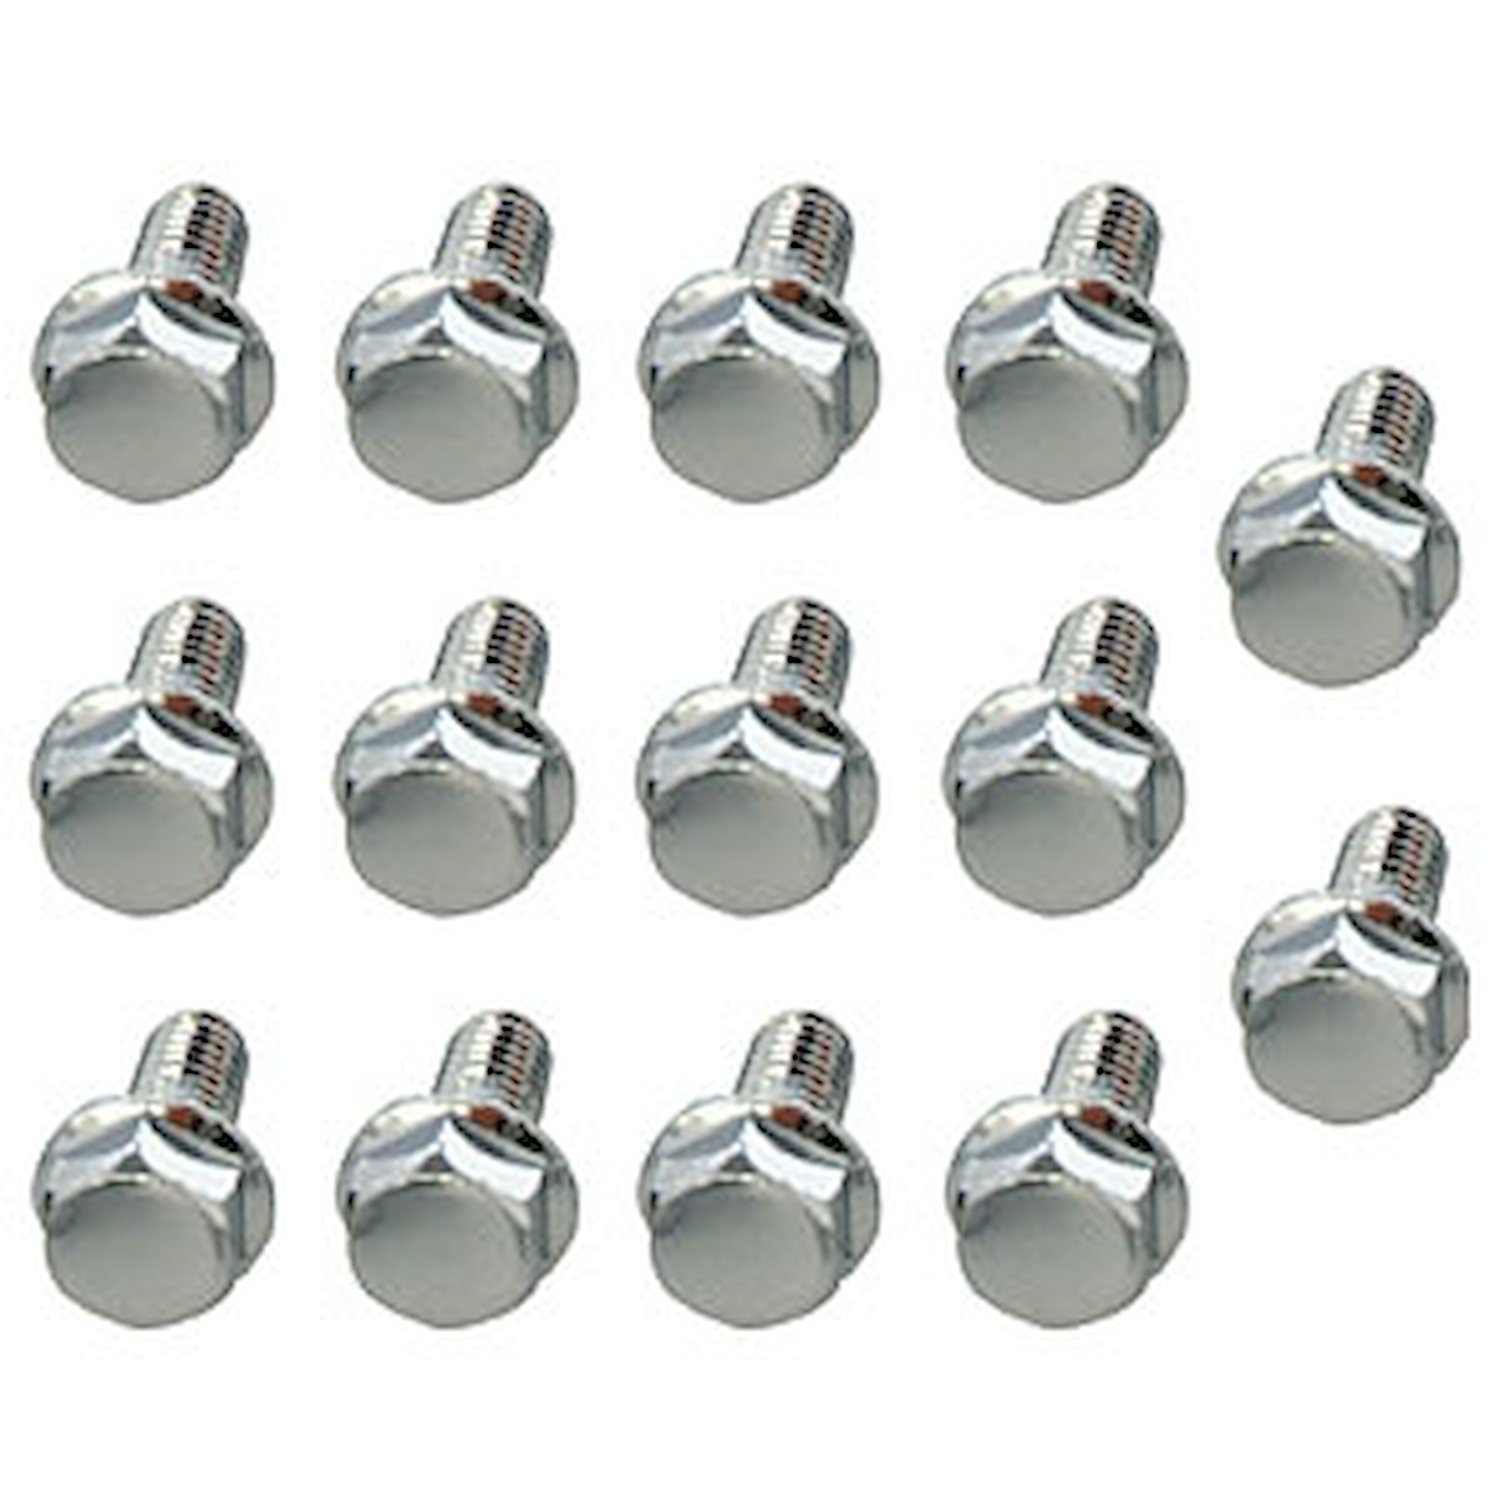 Rear Differential Cover Bolts 5/16"-18 x 3/4"